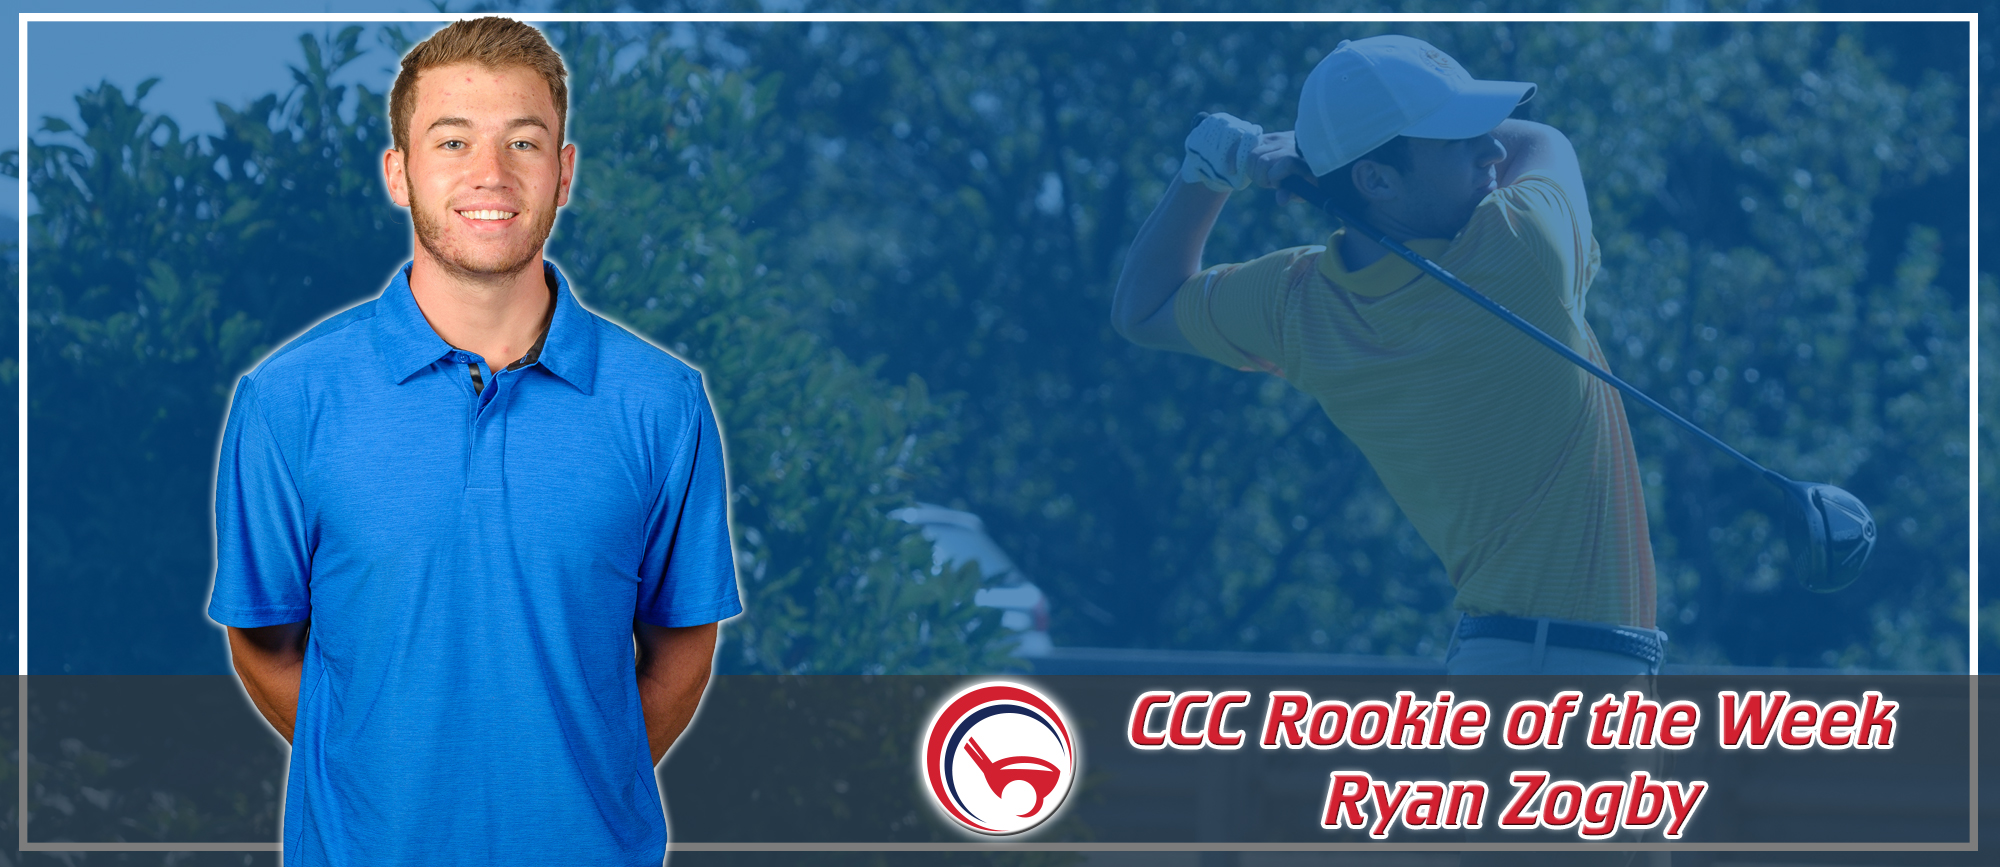 Ryan Zogby Earns CCC Rookie of the Week Honors